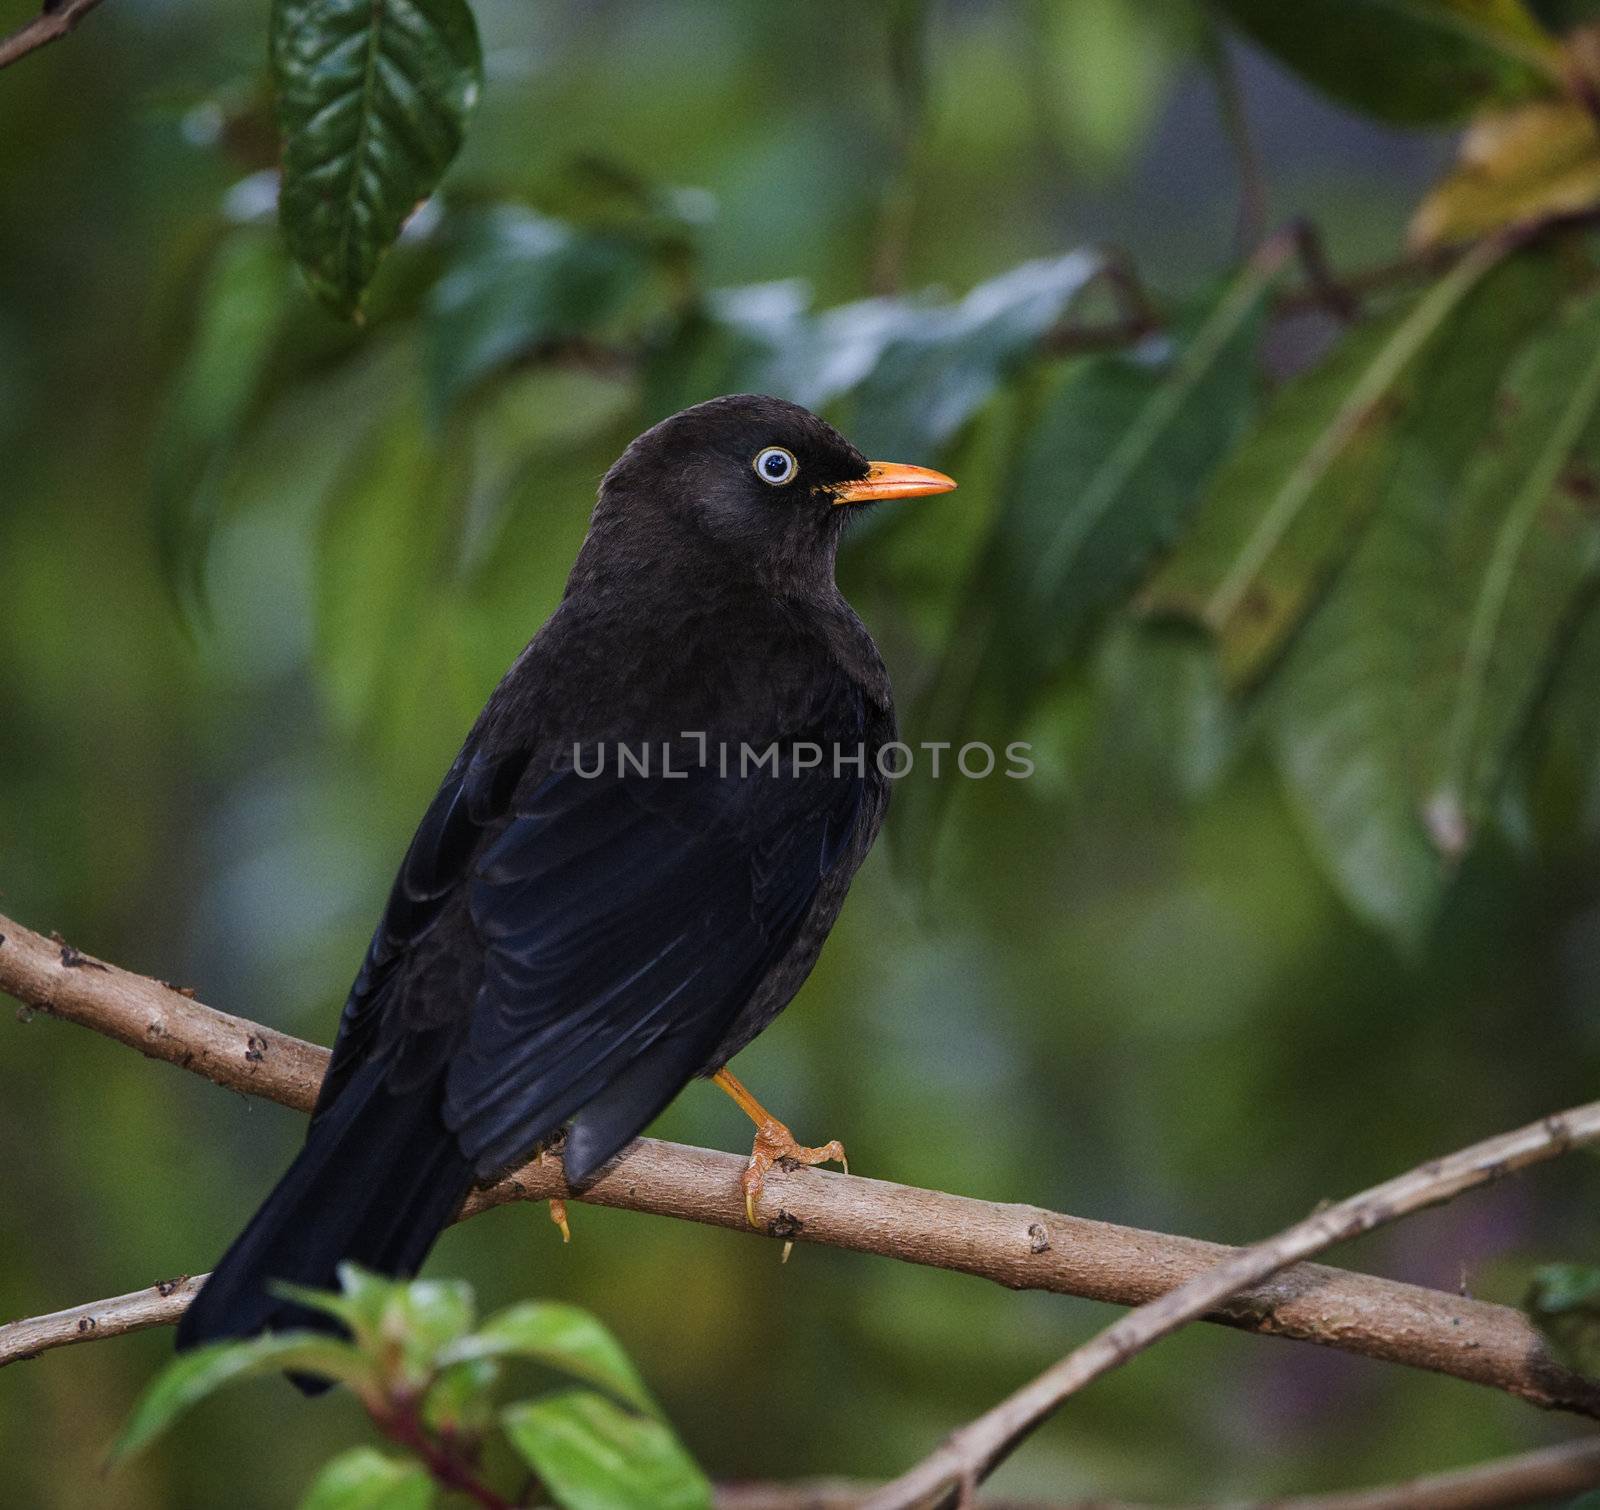 The Sooty Thrush. (Turdus nigrescens) is a large thrush endemic to the highlands of Costa Rica and western Panama.